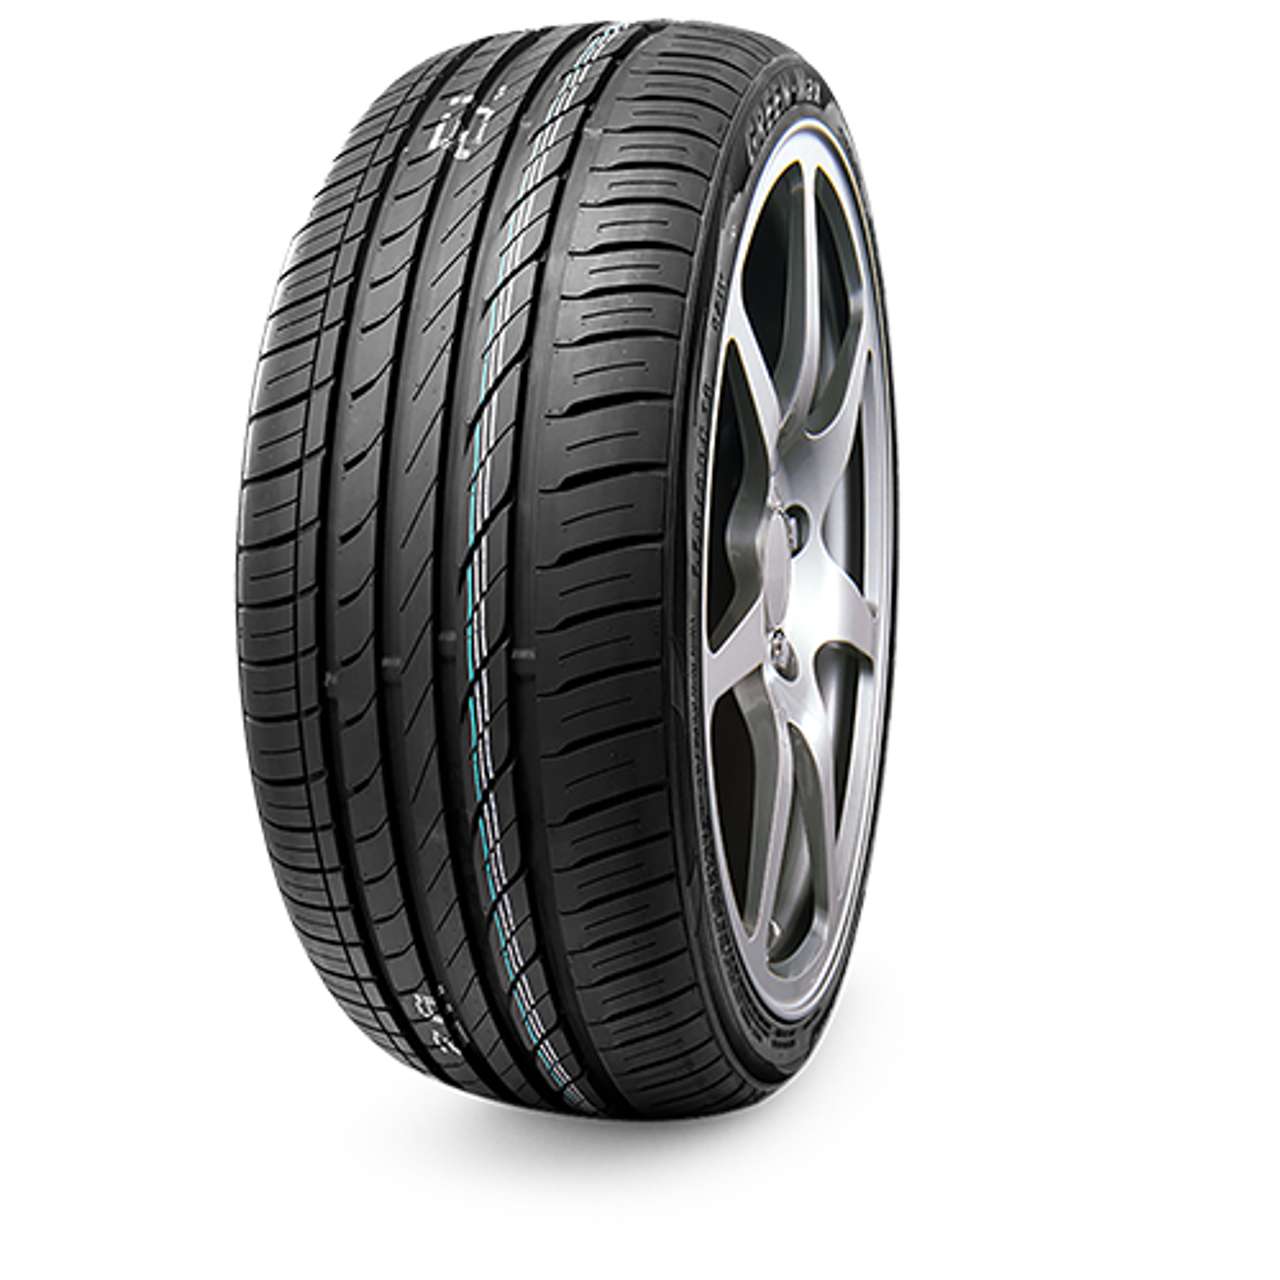 LINGLONG GREEN-MAX 265/30R19 93W MFS BSW von LINGLONG